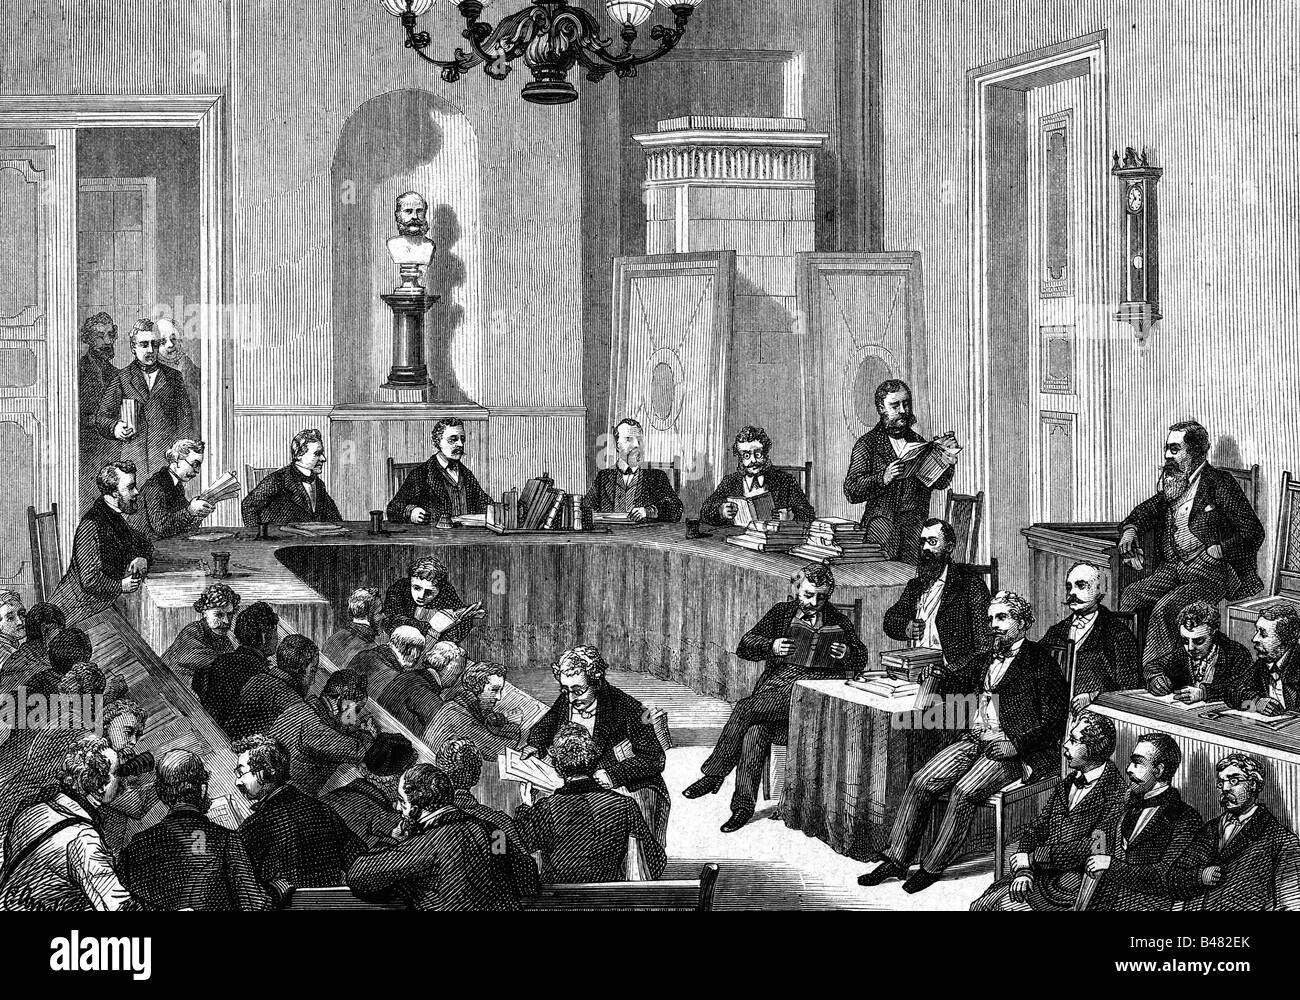 Arnim, Harry Earl, 3.10.1824 - 19.5.1881, German diplomat, court in case of offence of the public security, Berlin, 1875, wood engraving, Stock Photo